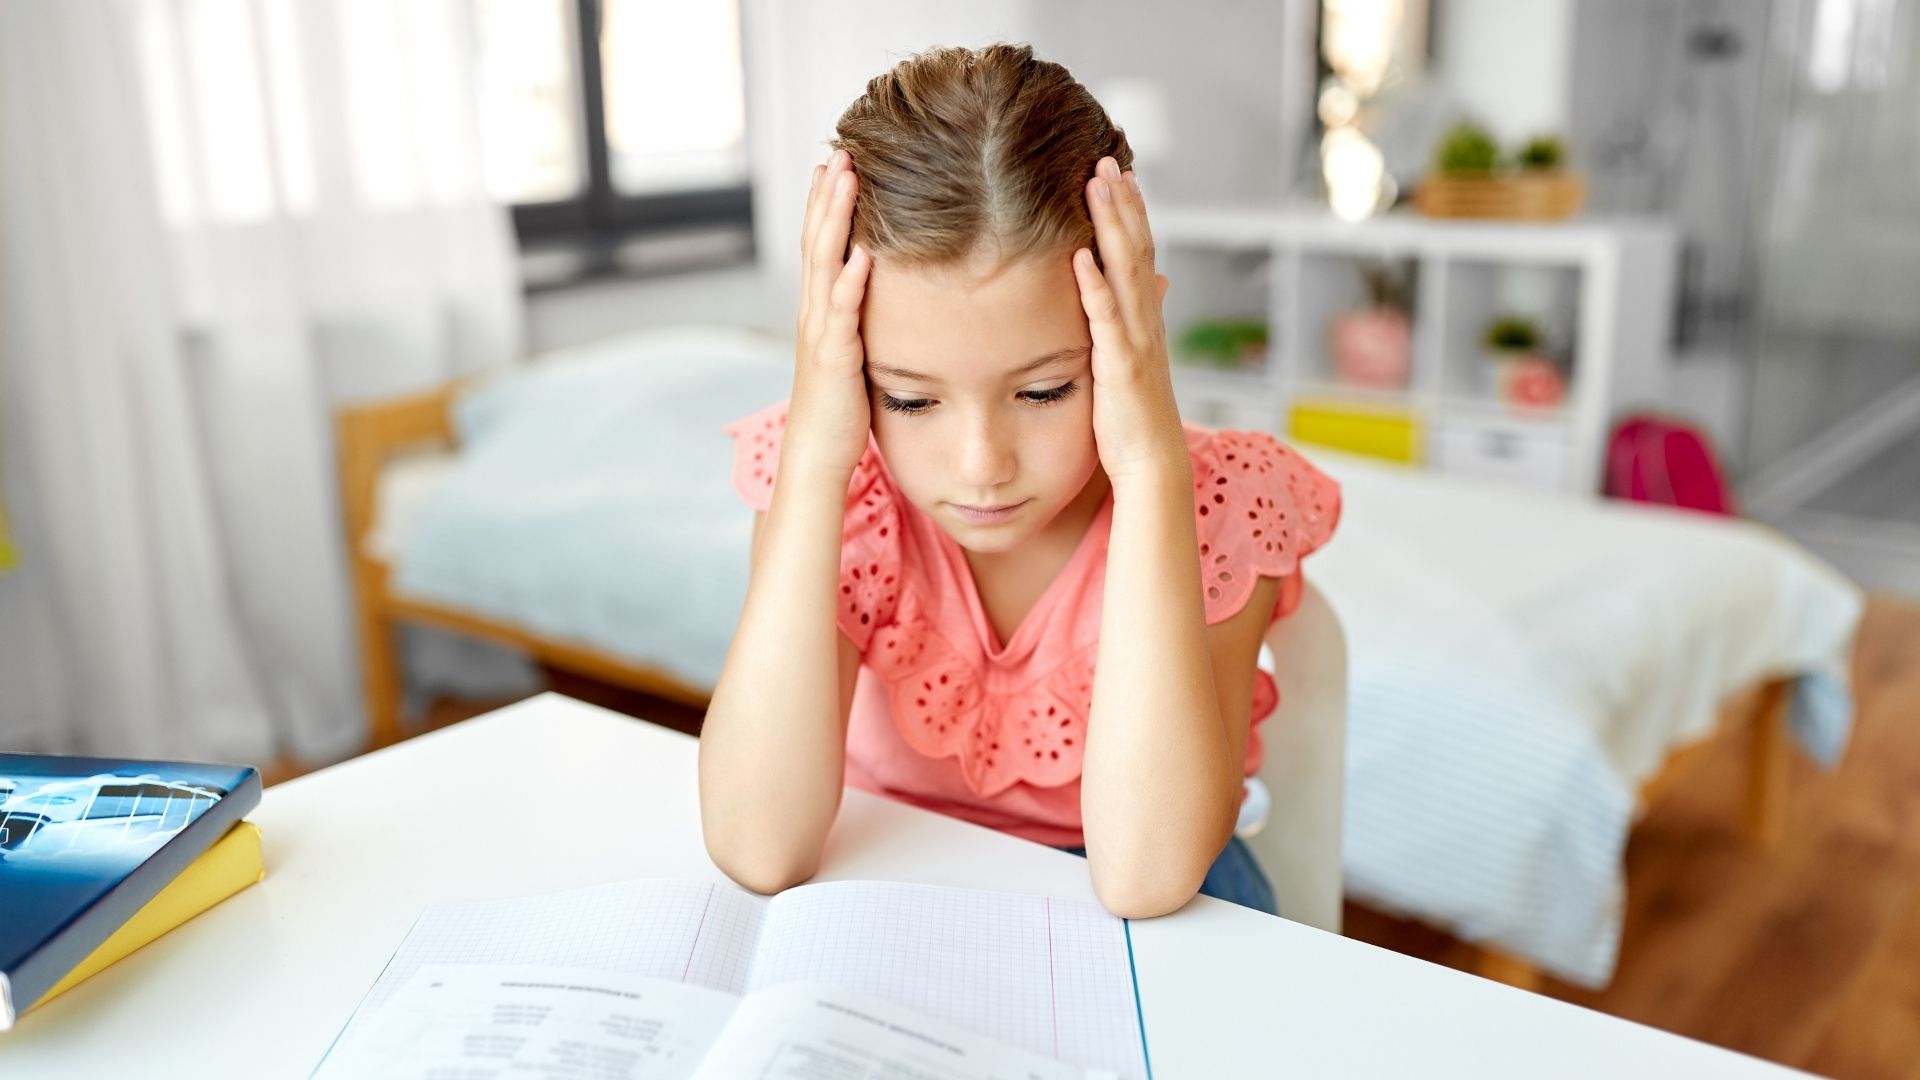 What are the Warning Signs of Anxiety in Children?